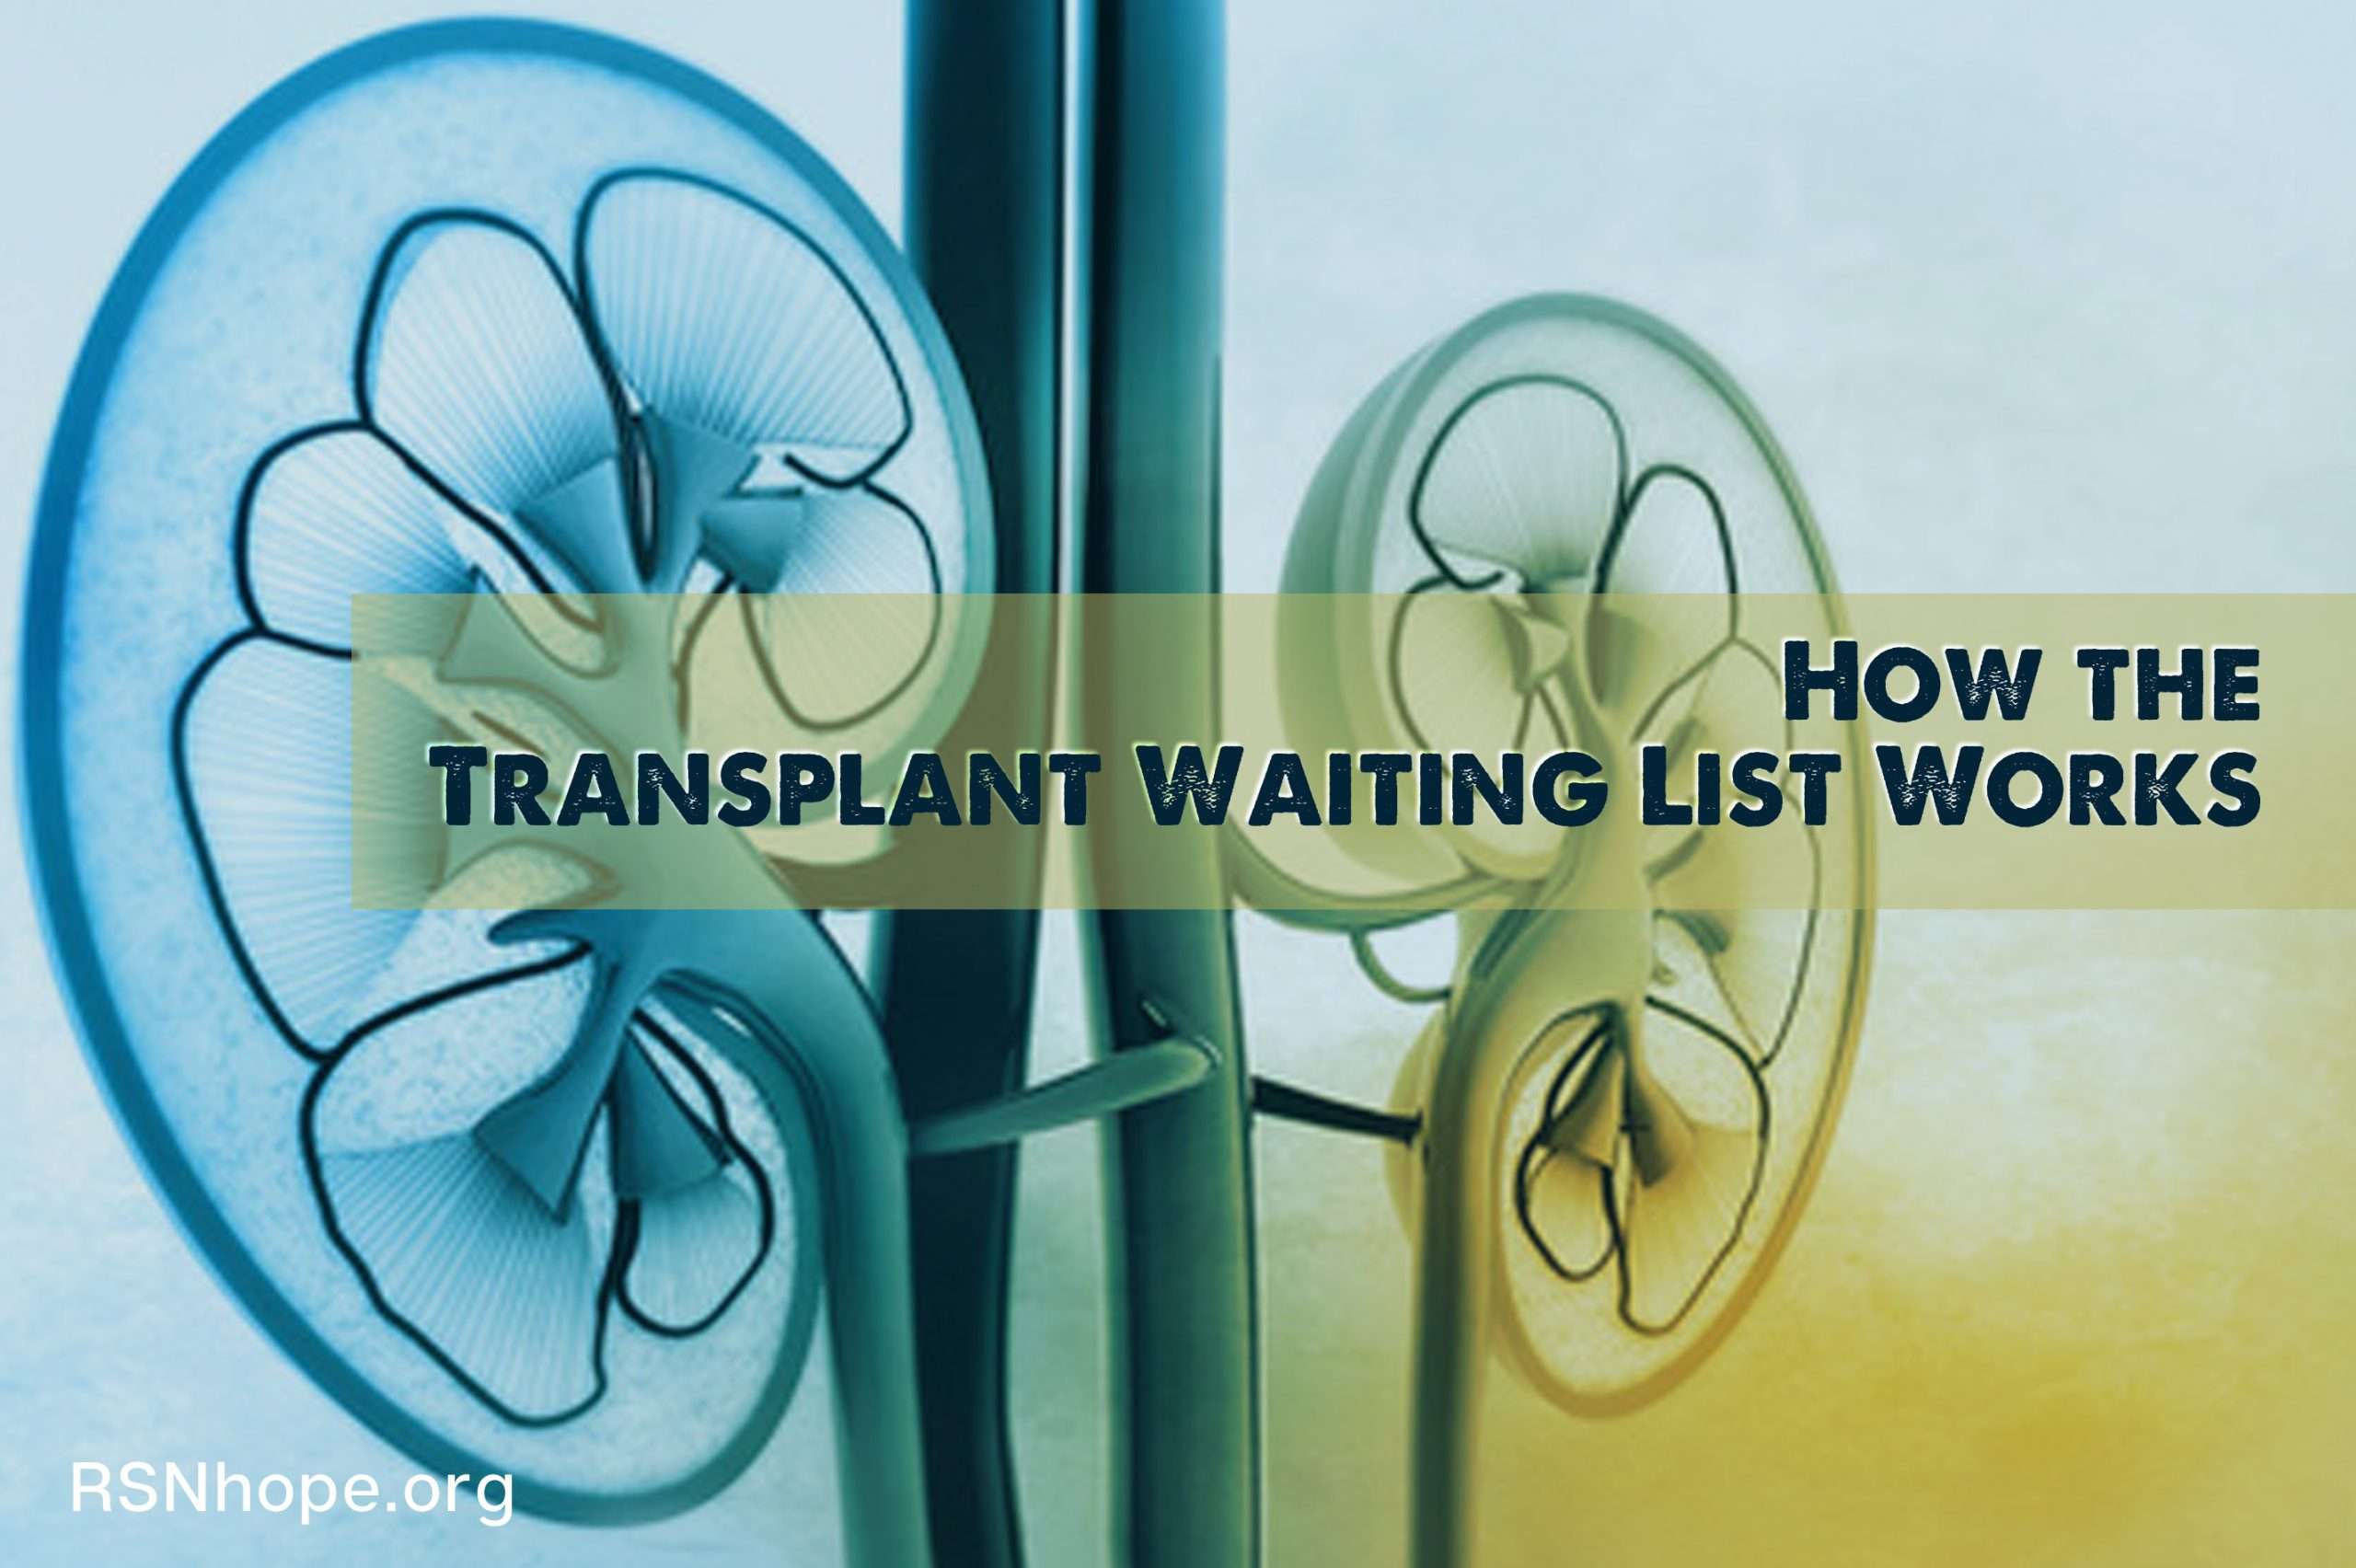 How the Transplant Waiting List Works